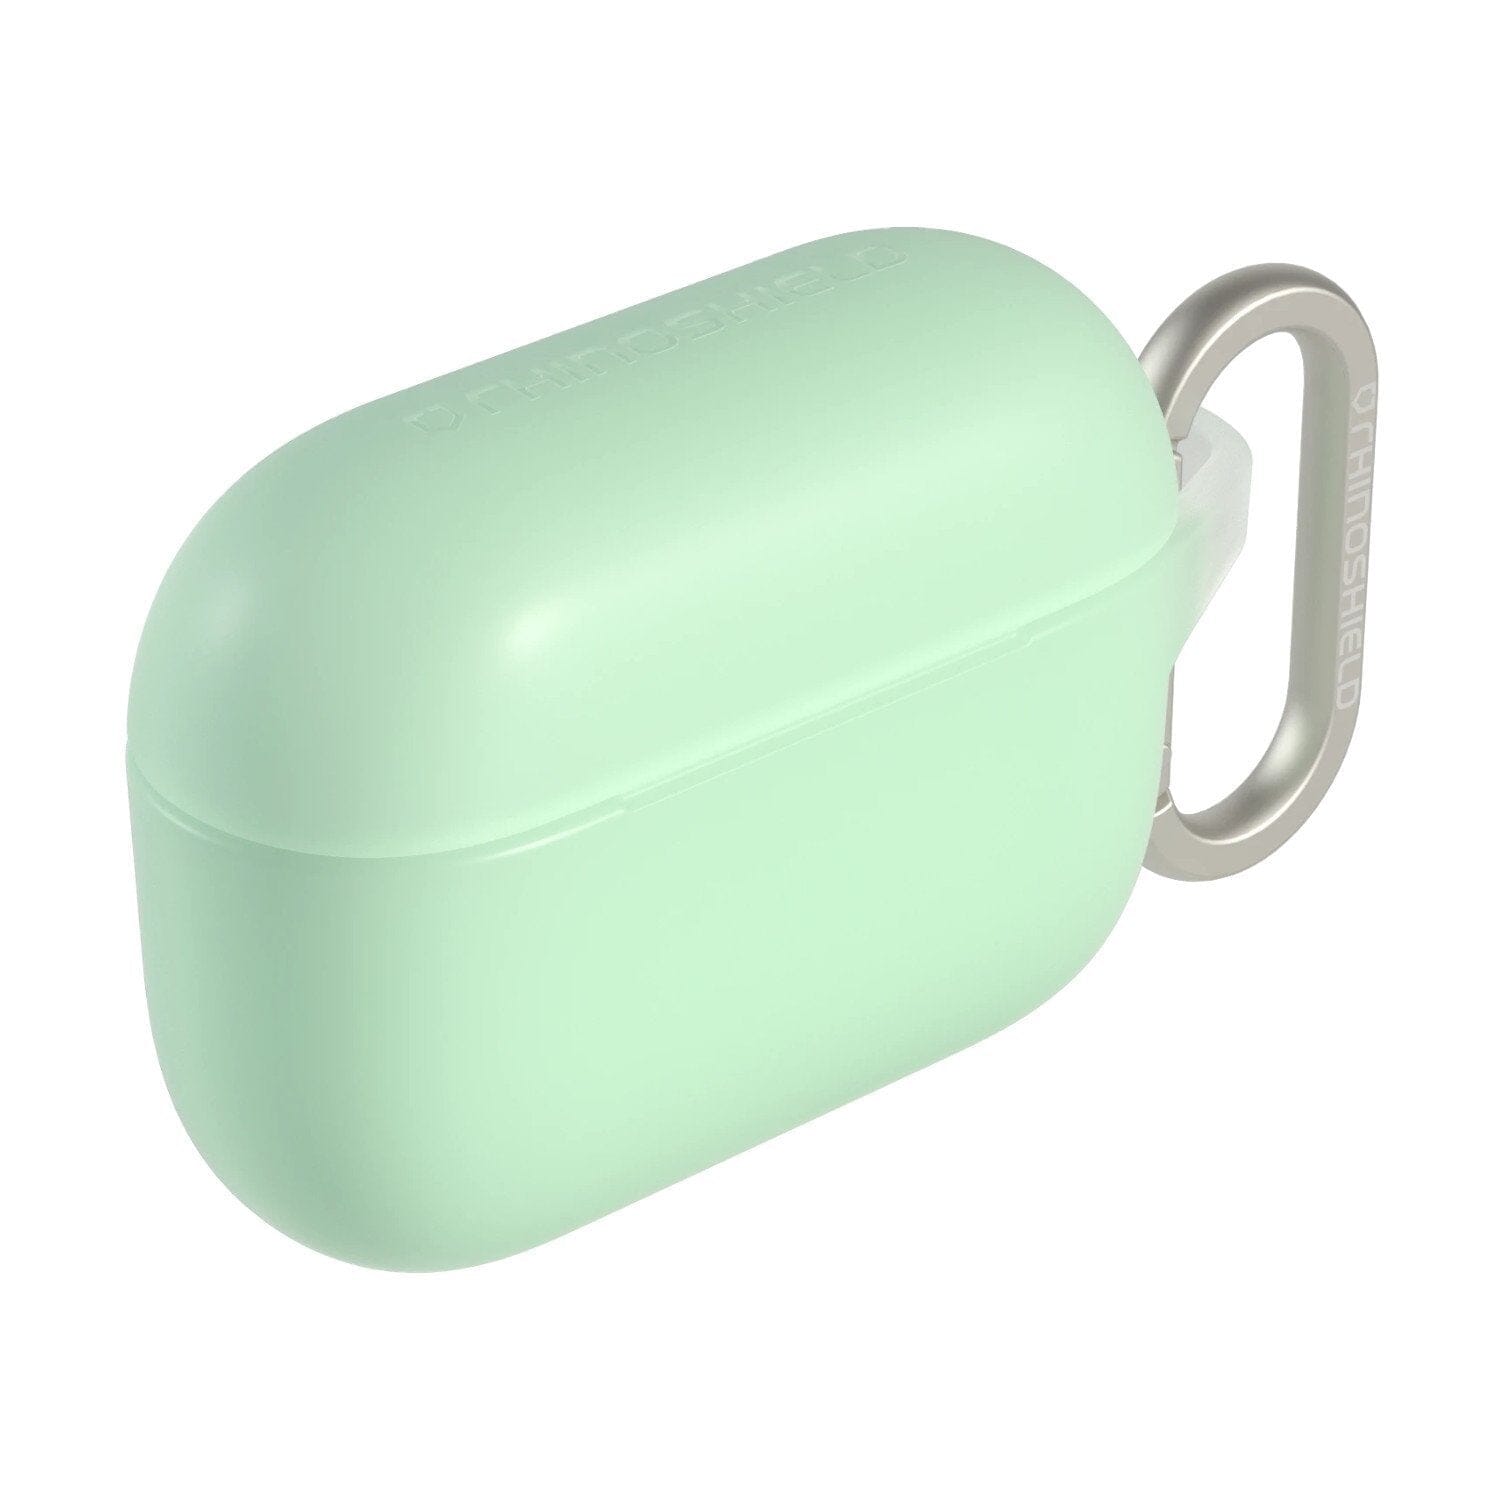 RhinoShield Impact Resistant Case for AirPods Pro AirPods Pro Series RhinoShield Mint Green 